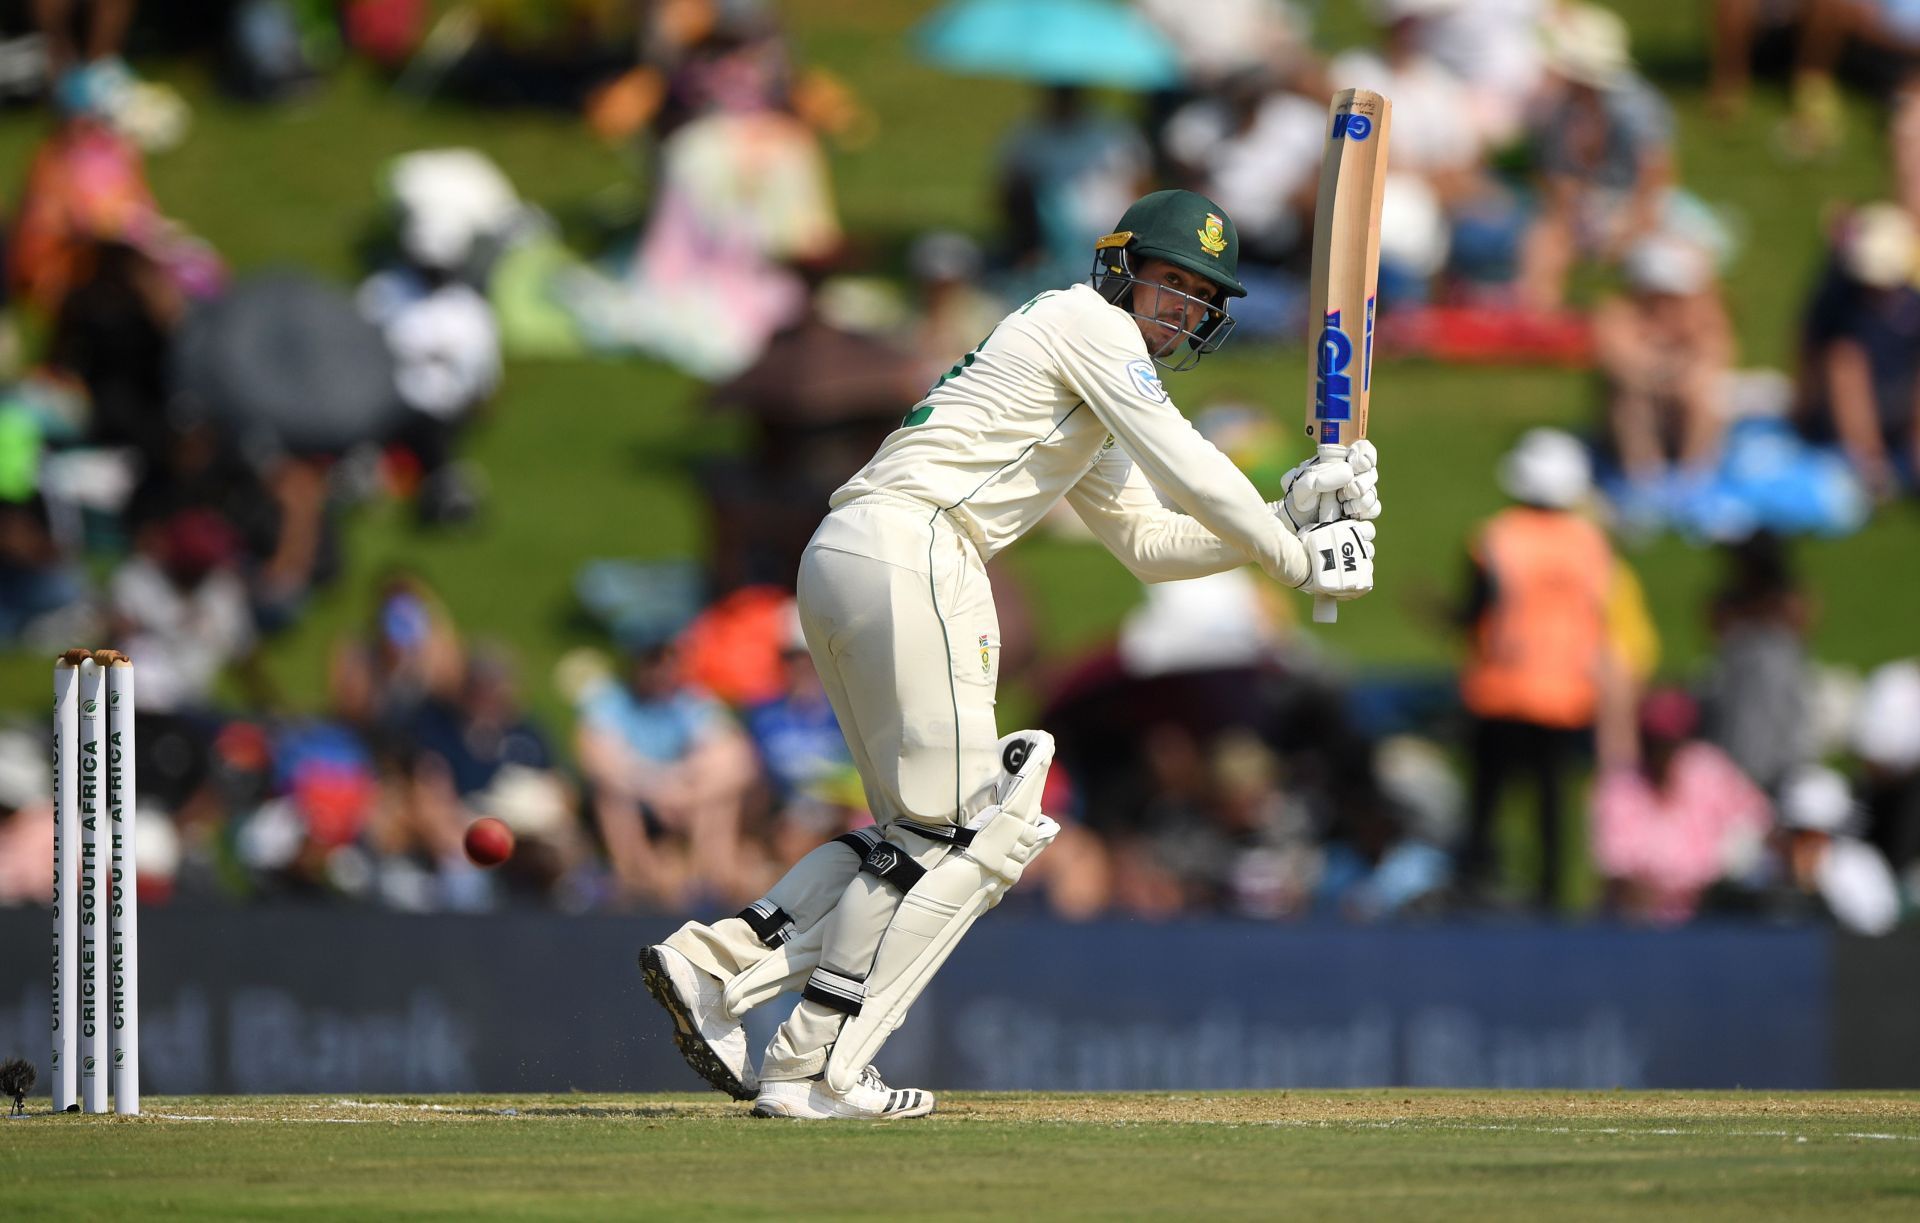 Quinton de Kock has called time on his Test career